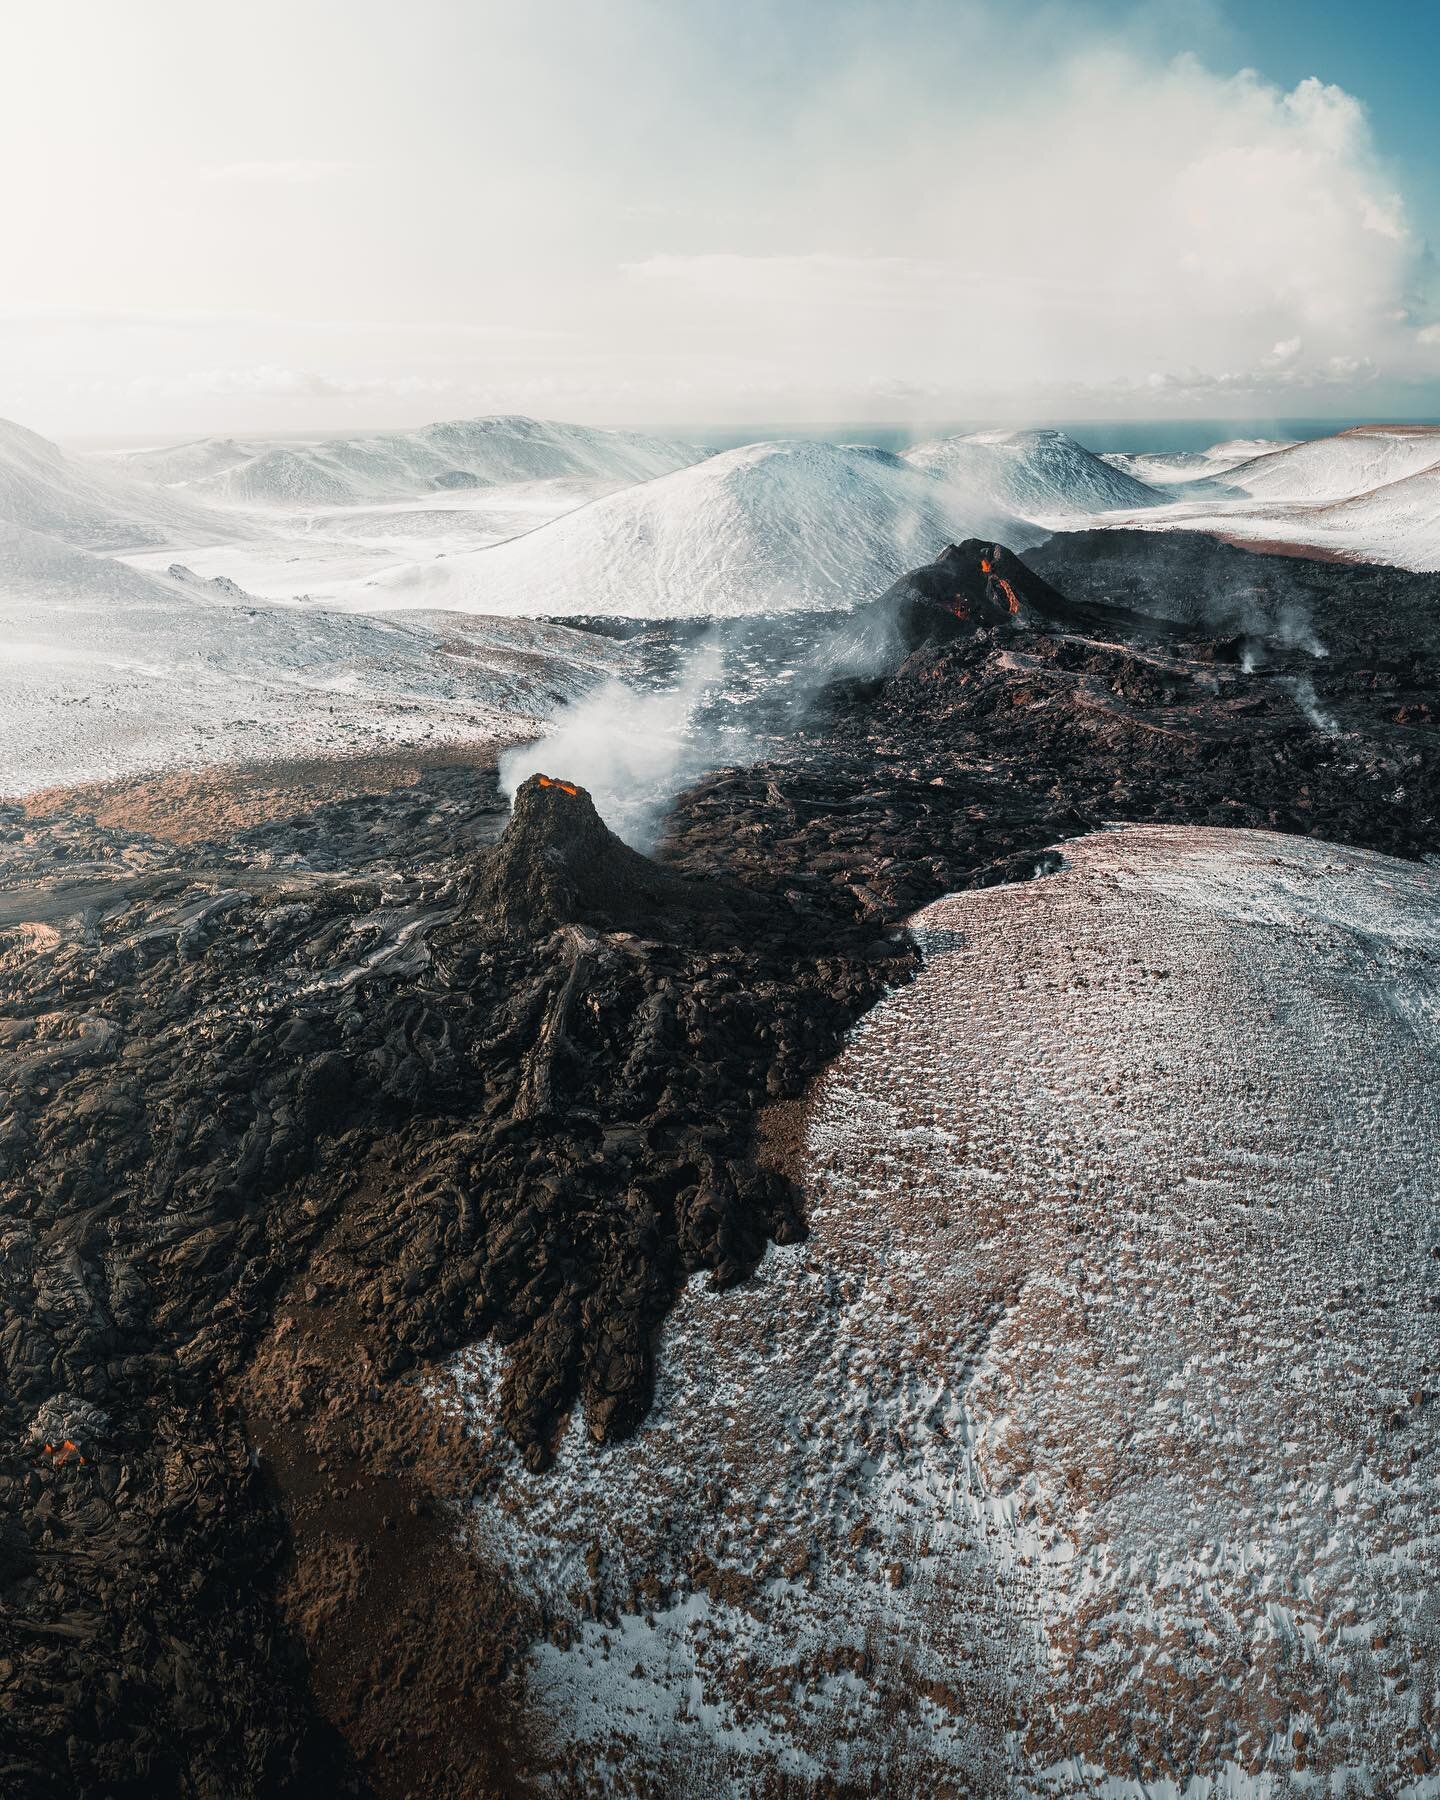 The show goes on. It's hard to keep up with the new fissures opening up but going there again tonight to see how it looks at the moment. Stay tuned! Here's an ice cold sunrise view in the meantime 🌋 swipe for the pano.

Follow @thrainnko for more ad